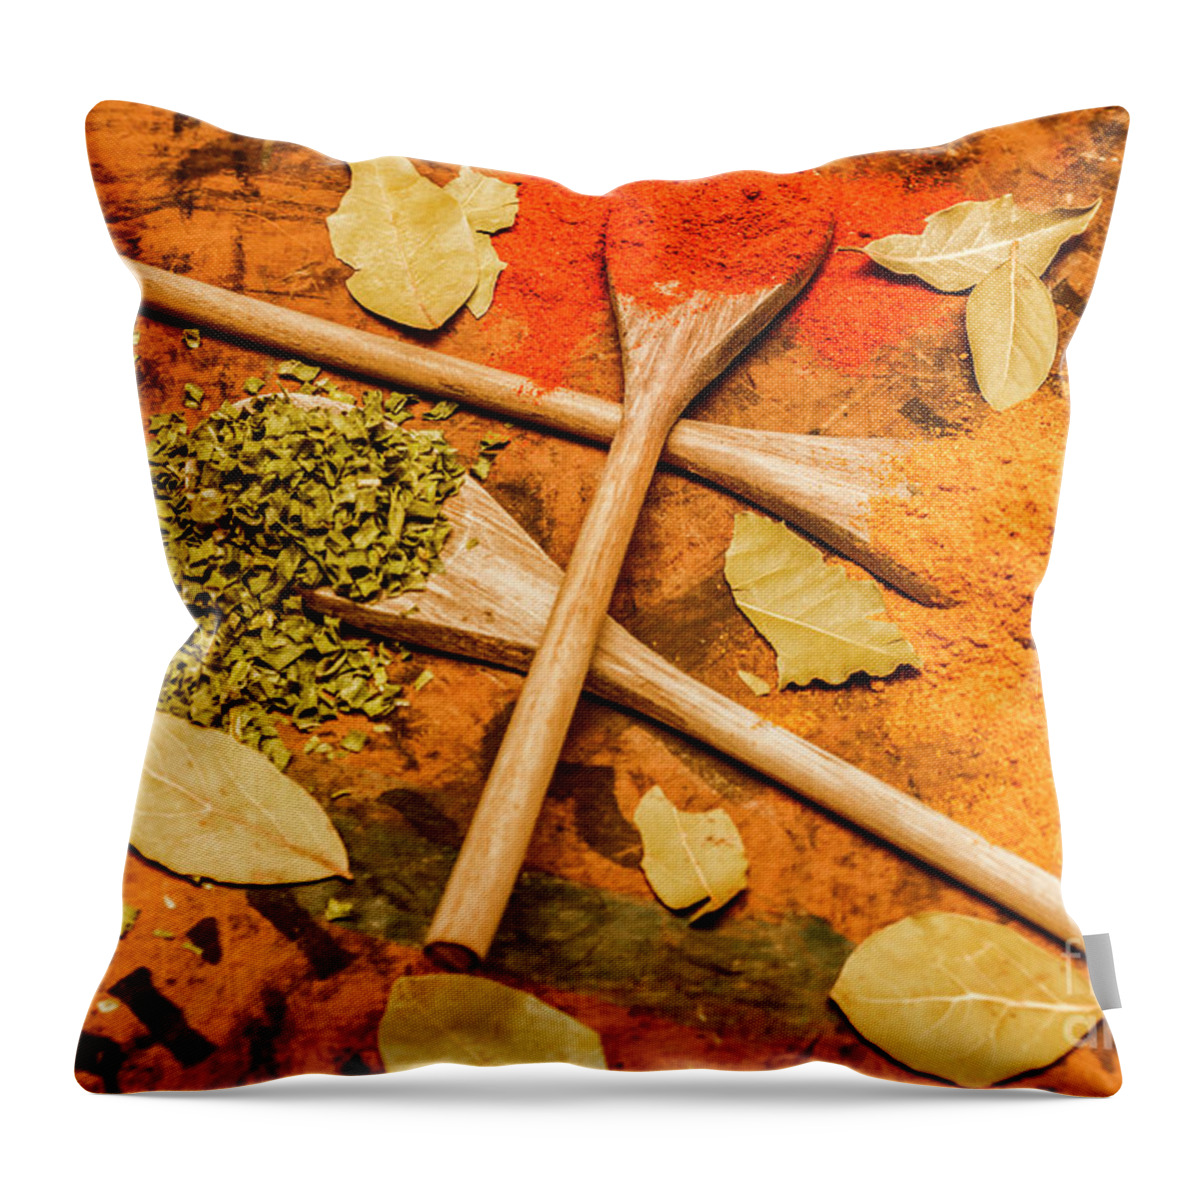 Powder Throw Pillow featuring the photograph Spicy kitchen ingredients by Jorgo Photography